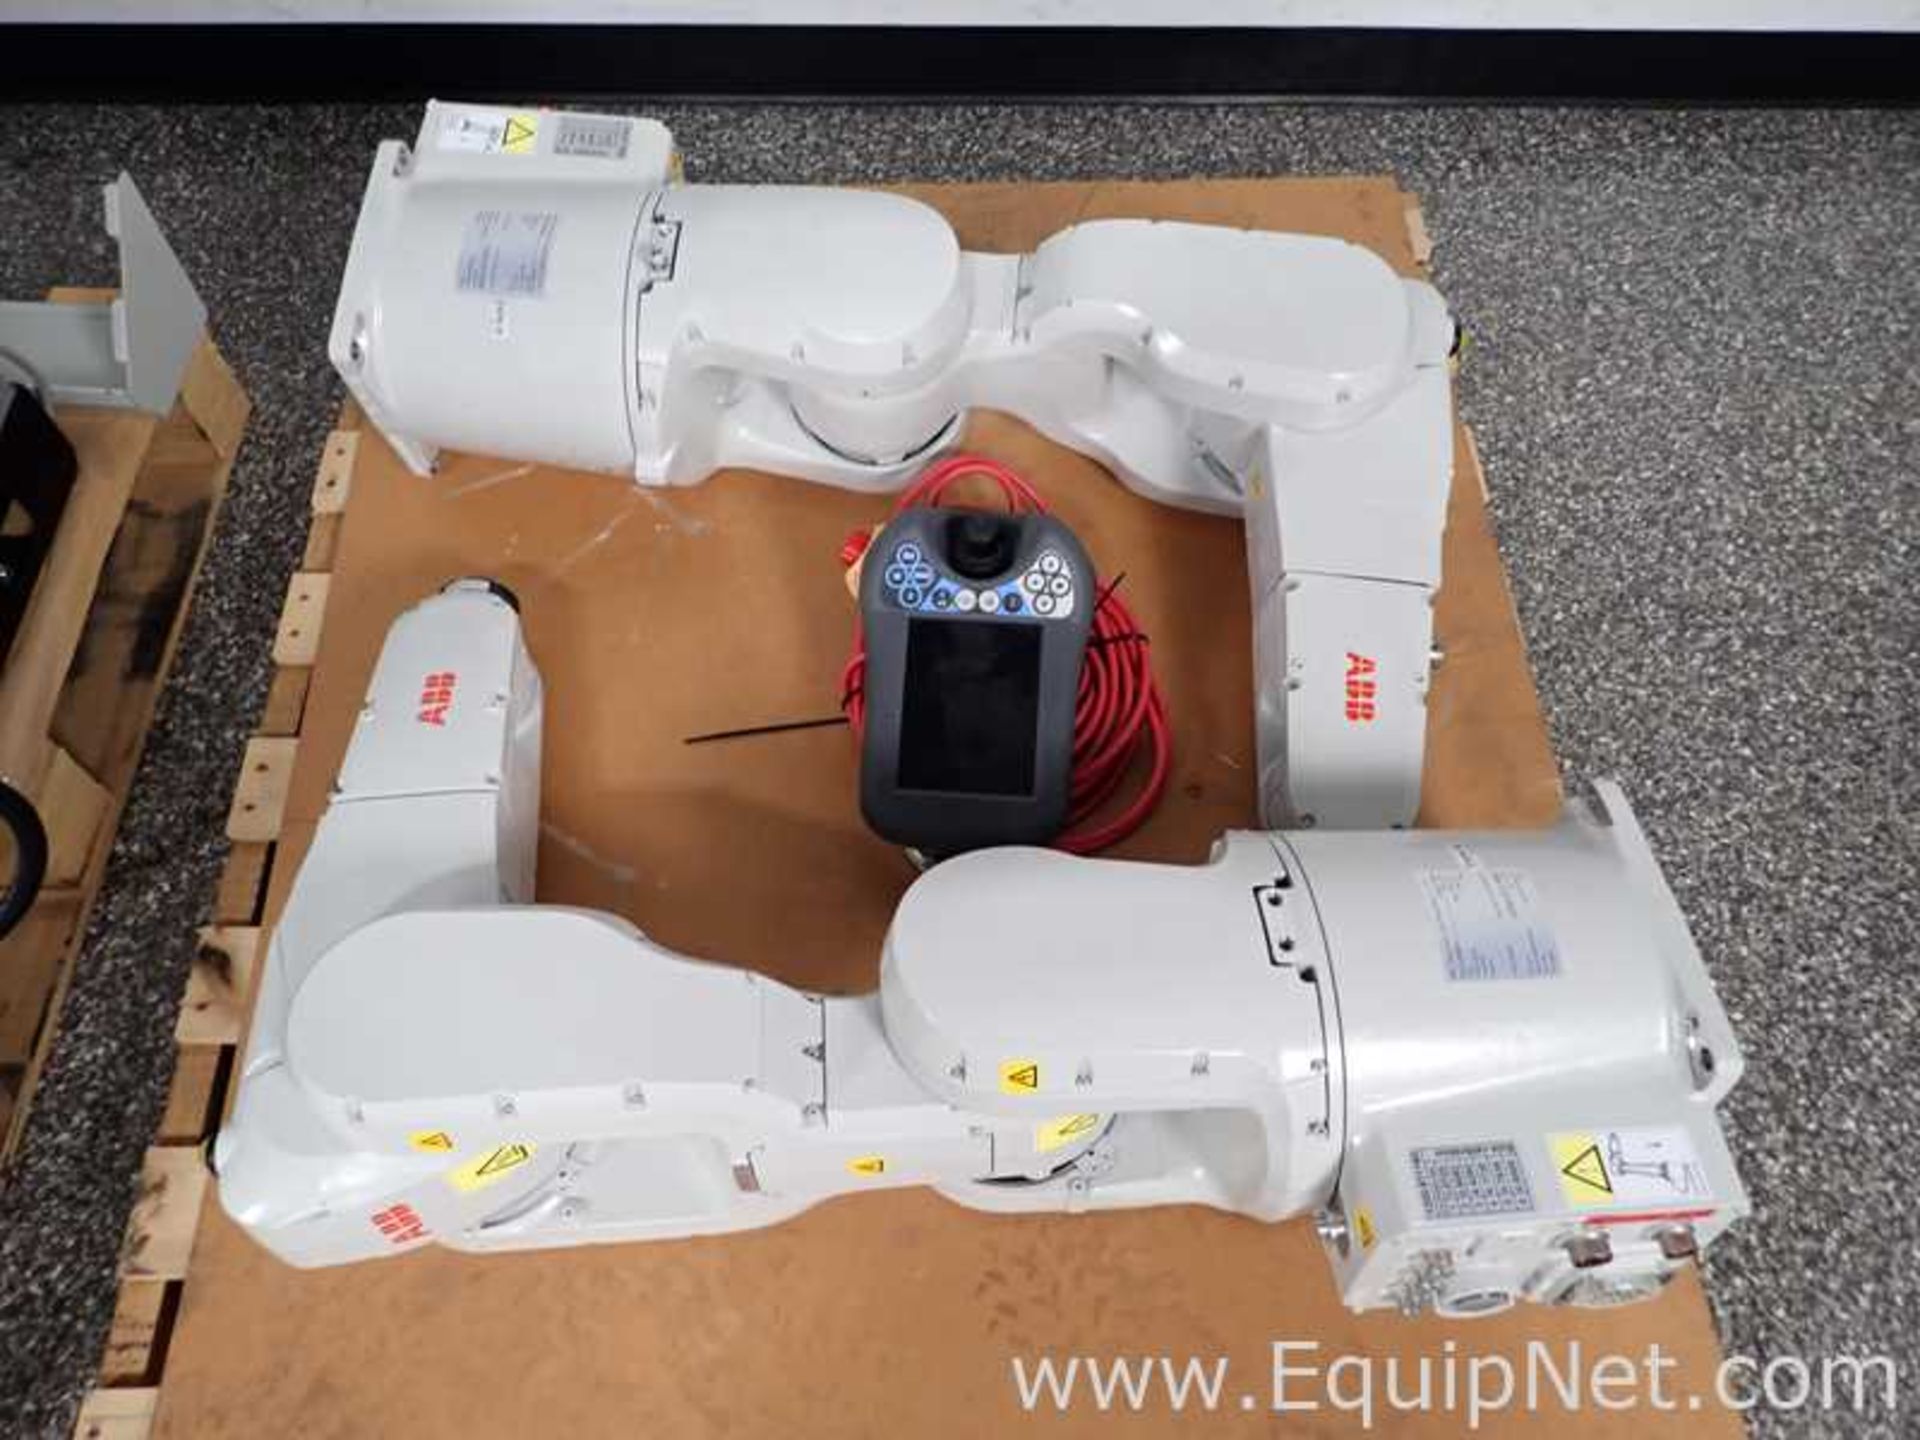 Lot of 2 ABB IRB 1200 Robotic Arms with IRC5 Industrial Controllers - Image 2 of 17